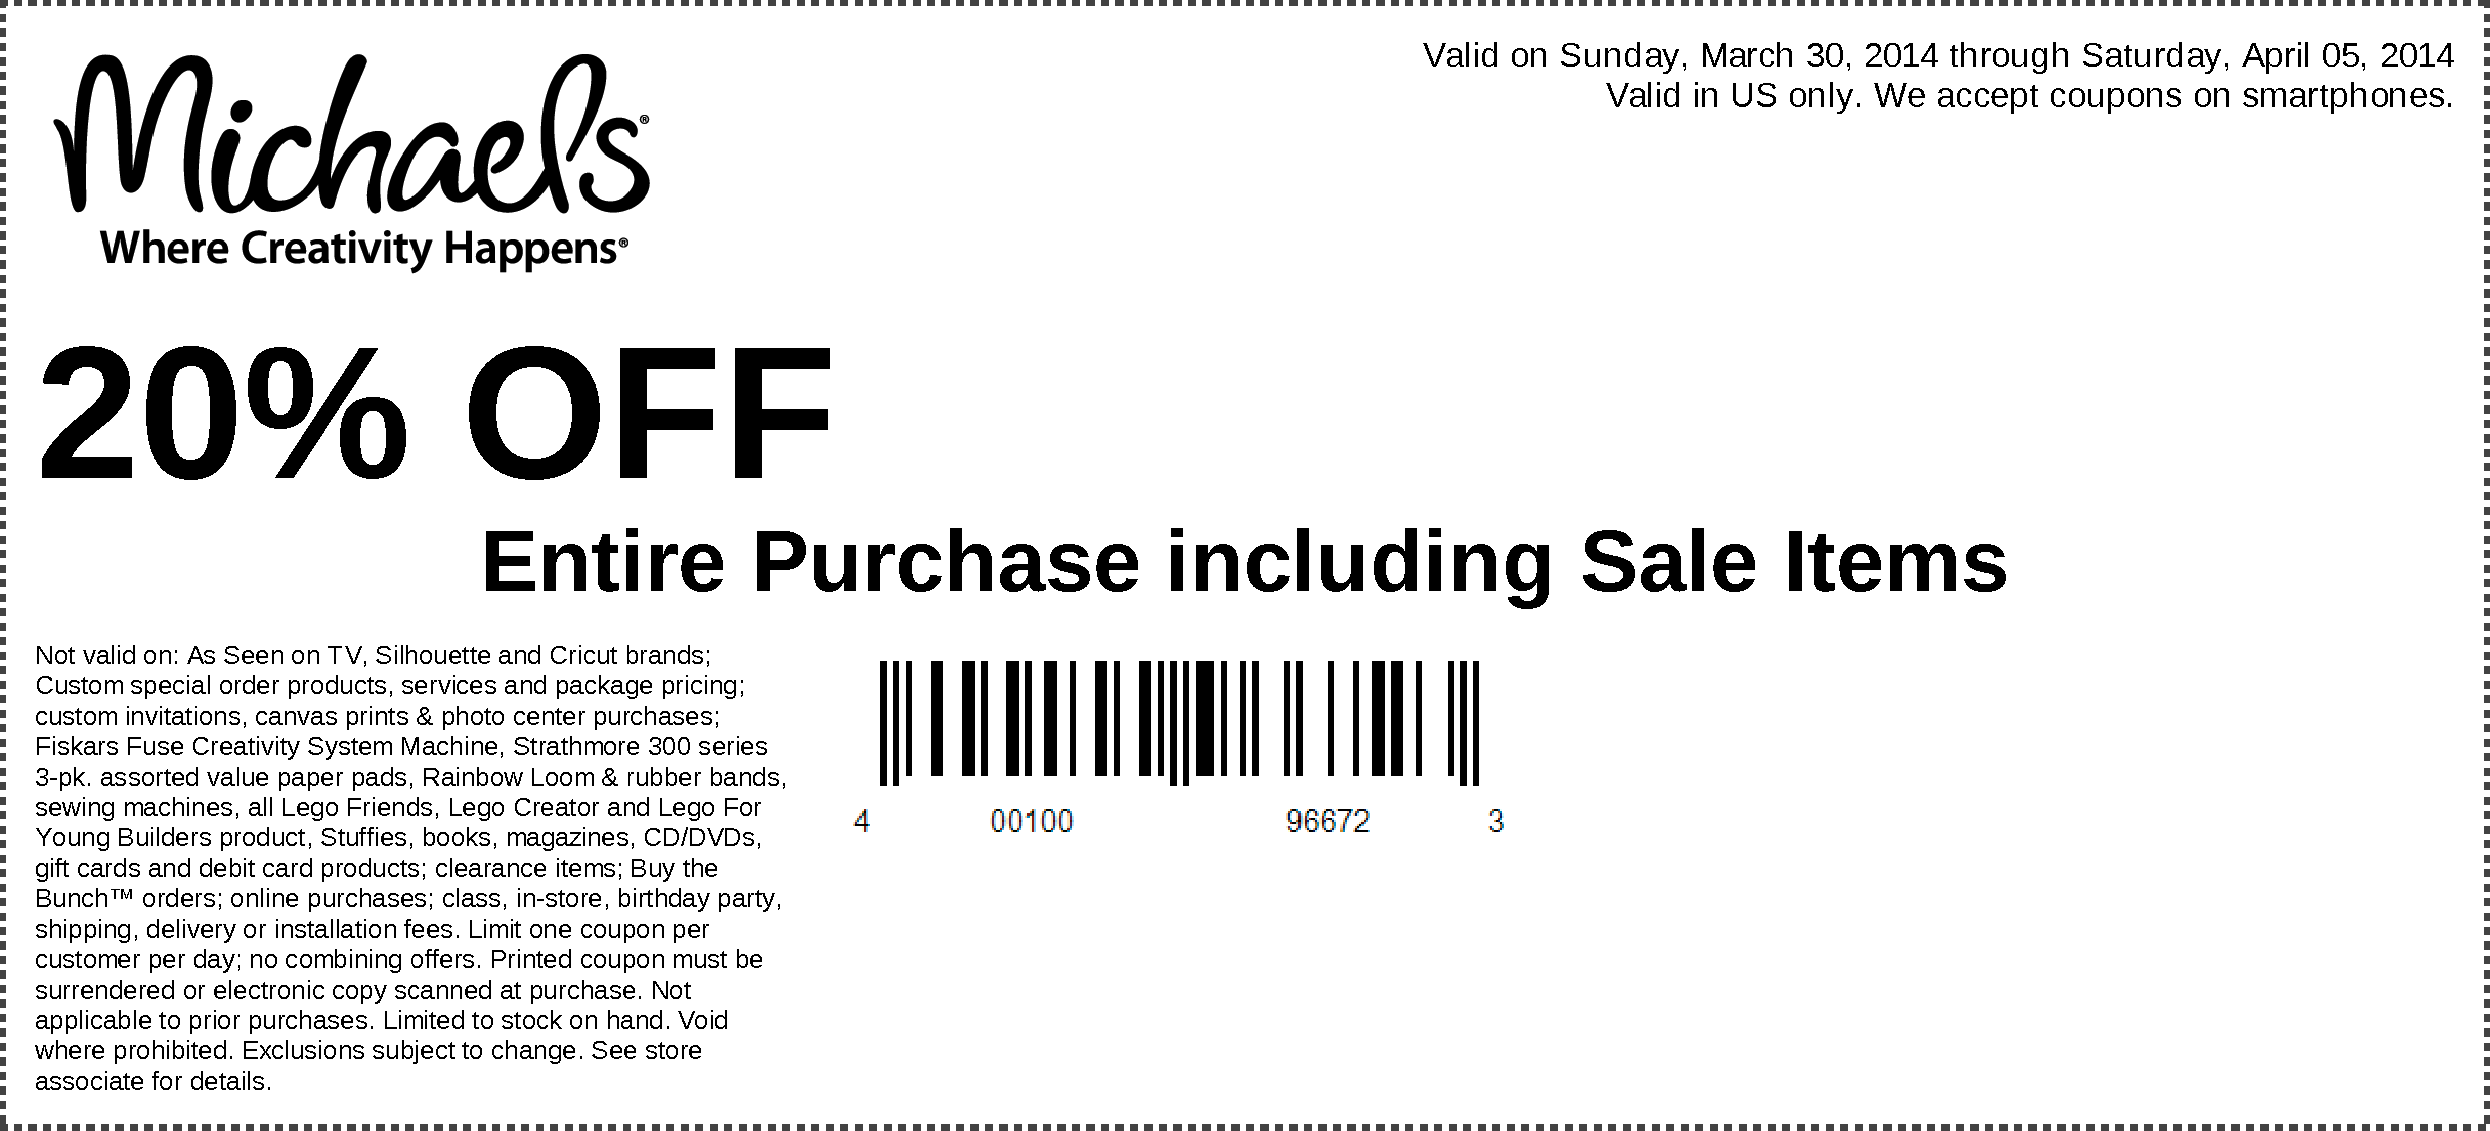 Michaels Promo Coupon Codes and Printable Coupons